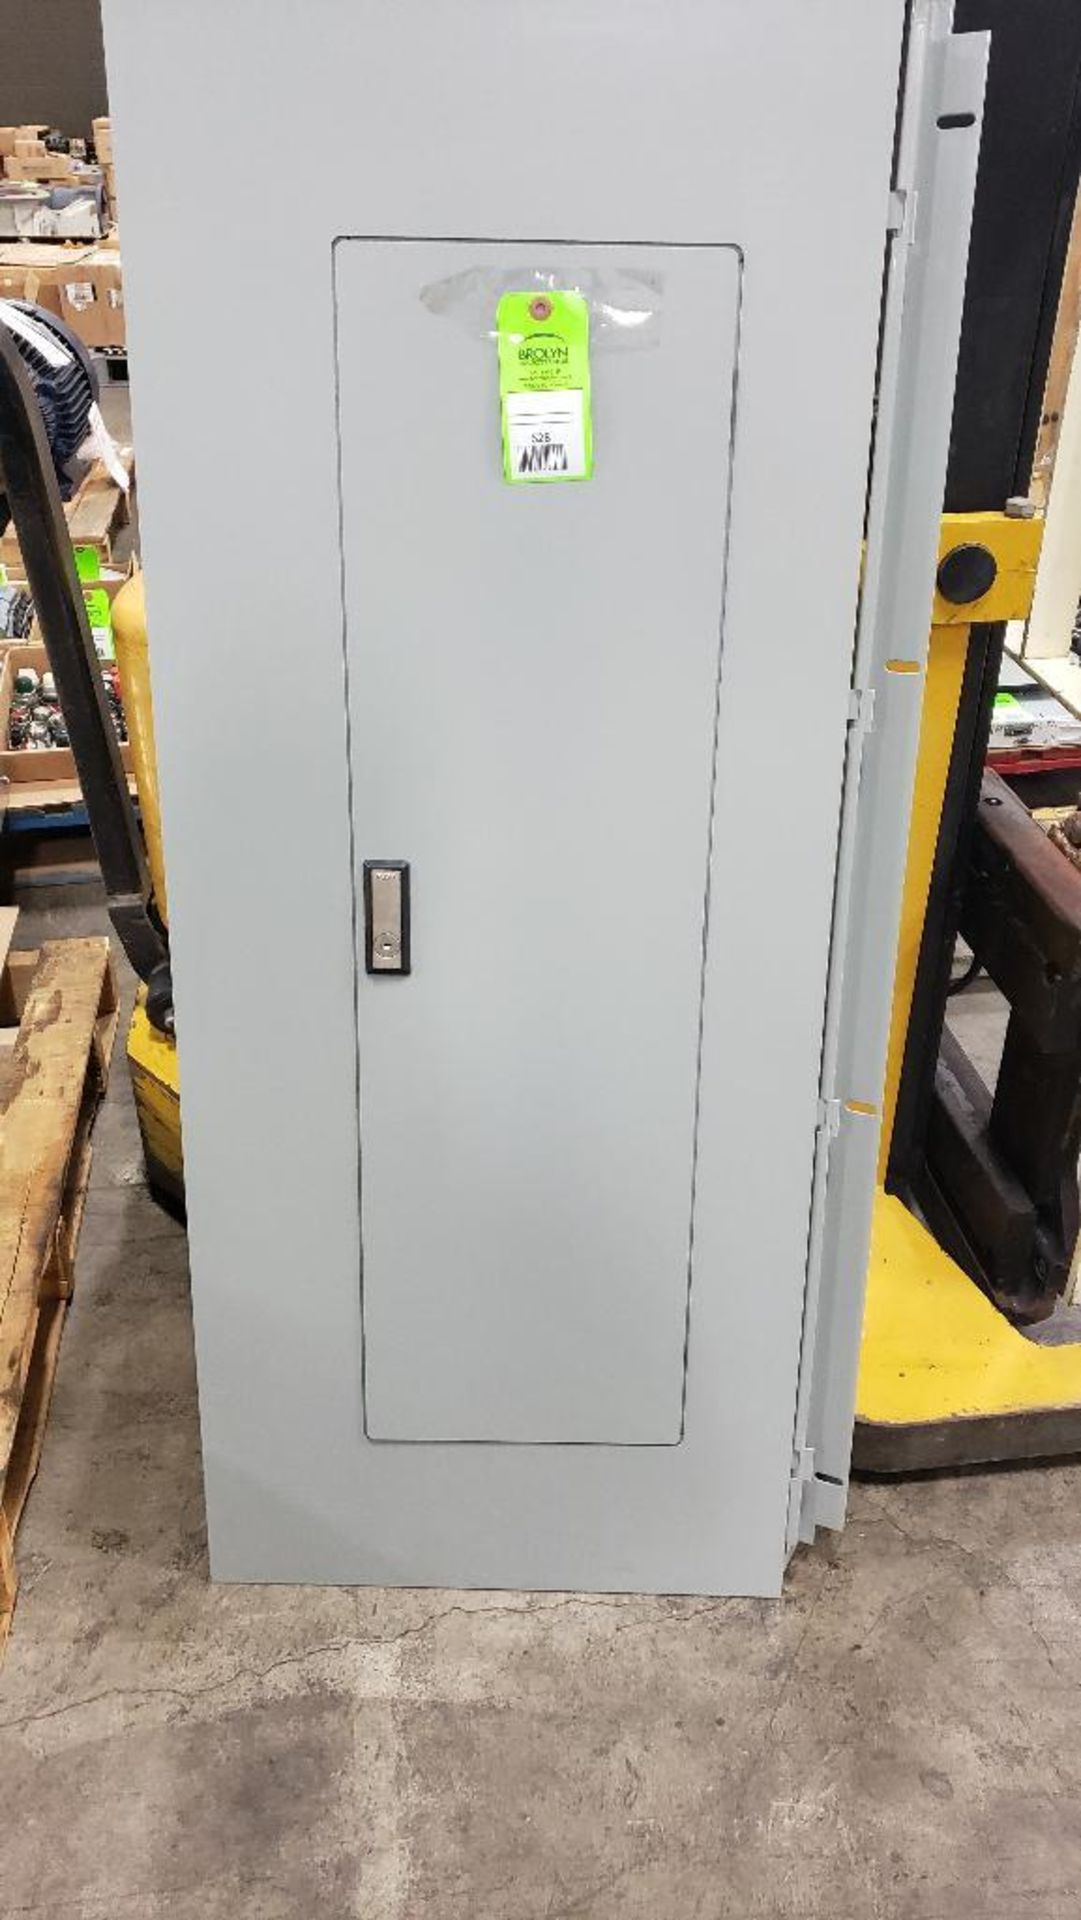 Eaton trim panel. Part number 42C4299H01. New as pictured.